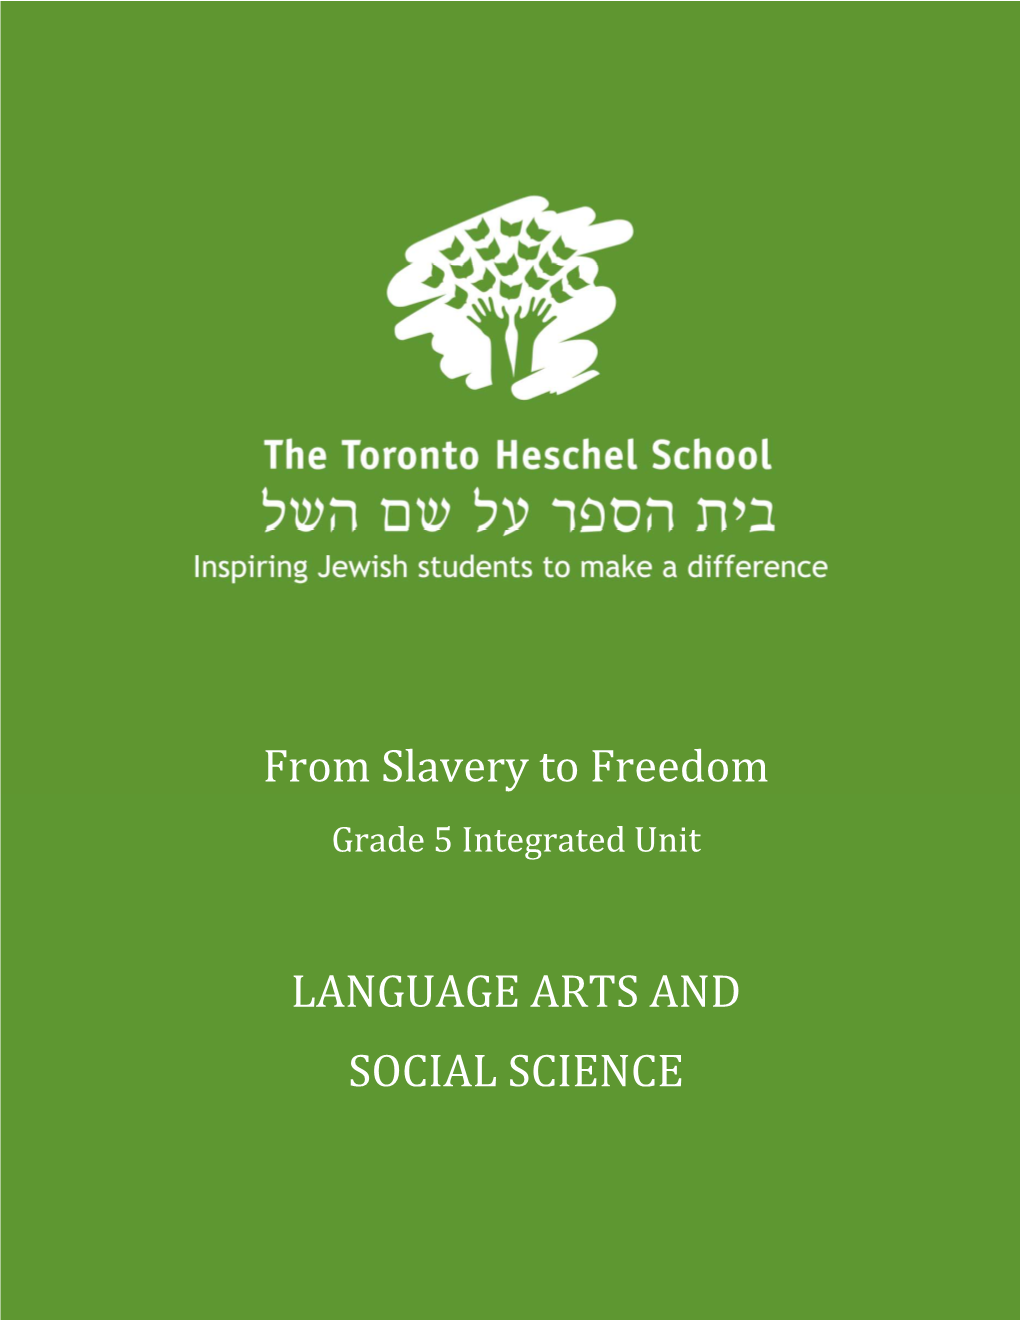 From Slavery to Freedom LANGUAGE ARTS and SOCIAL SCIENCE